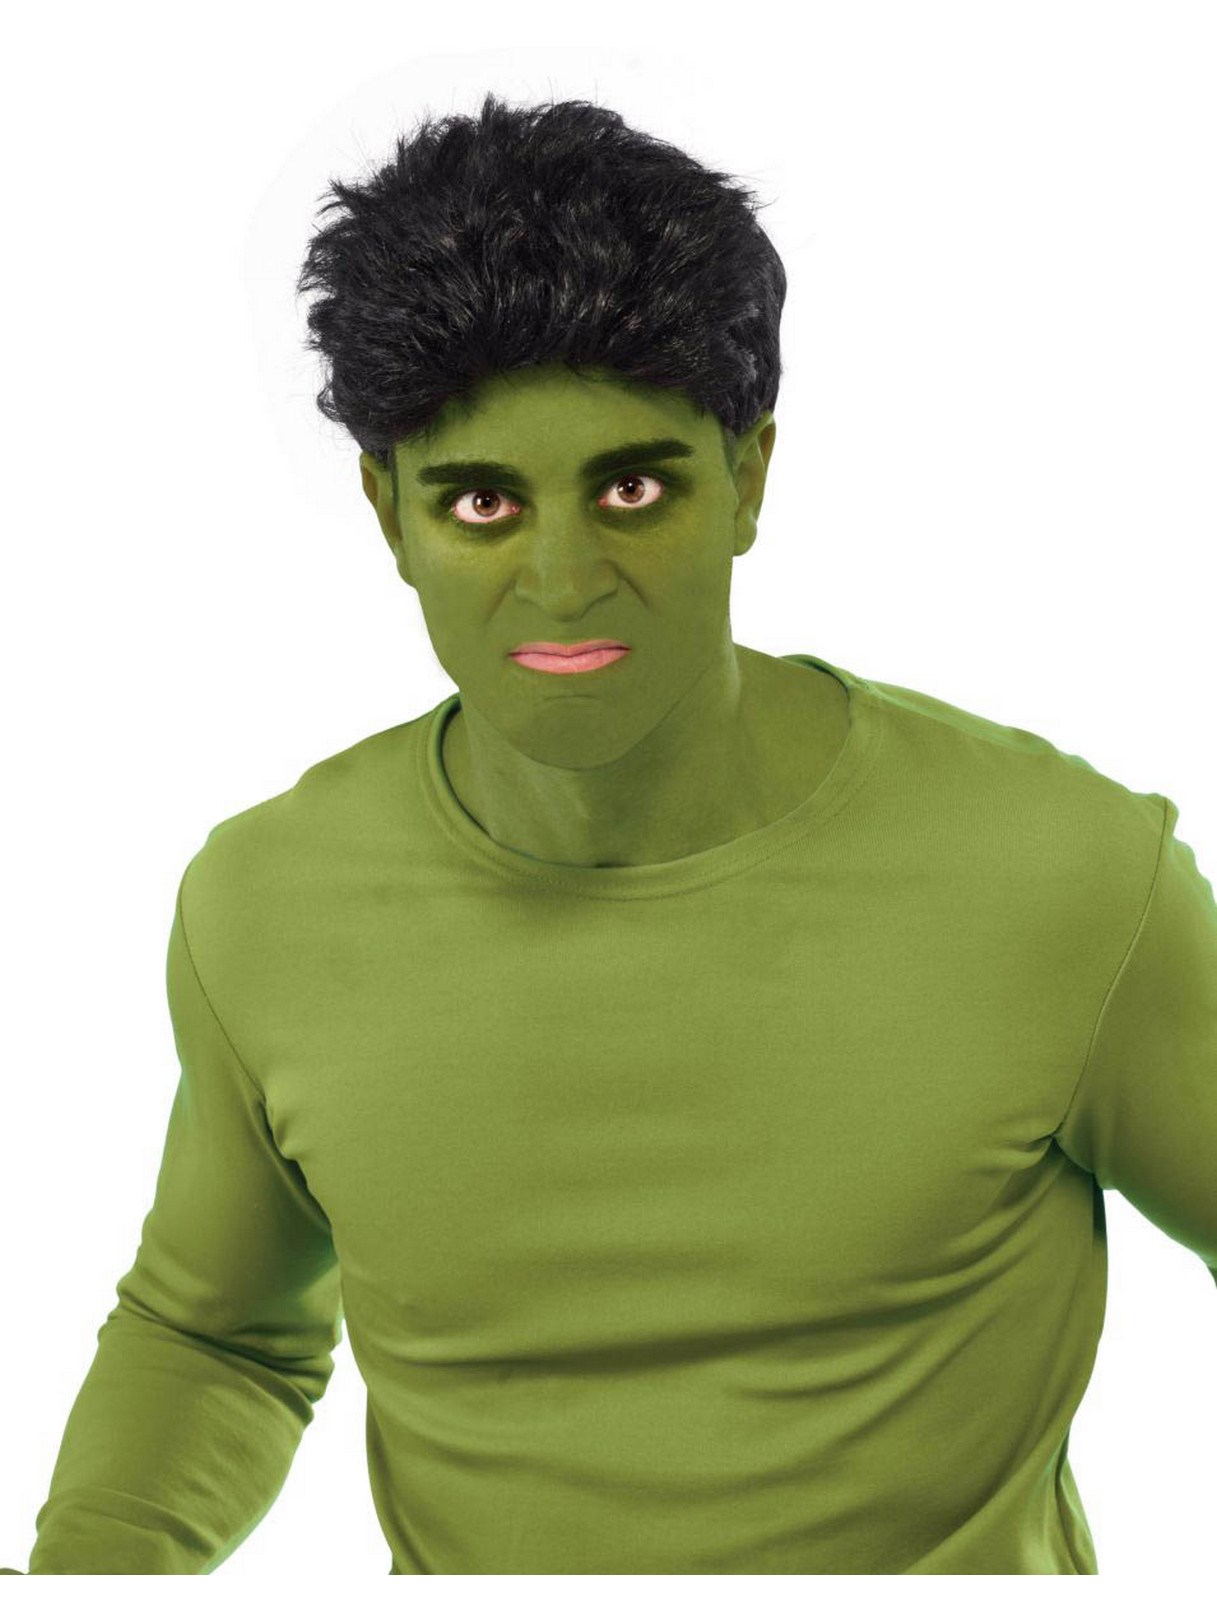 Avengers 2 - Age of Ultron: Hulk Wig For Adults